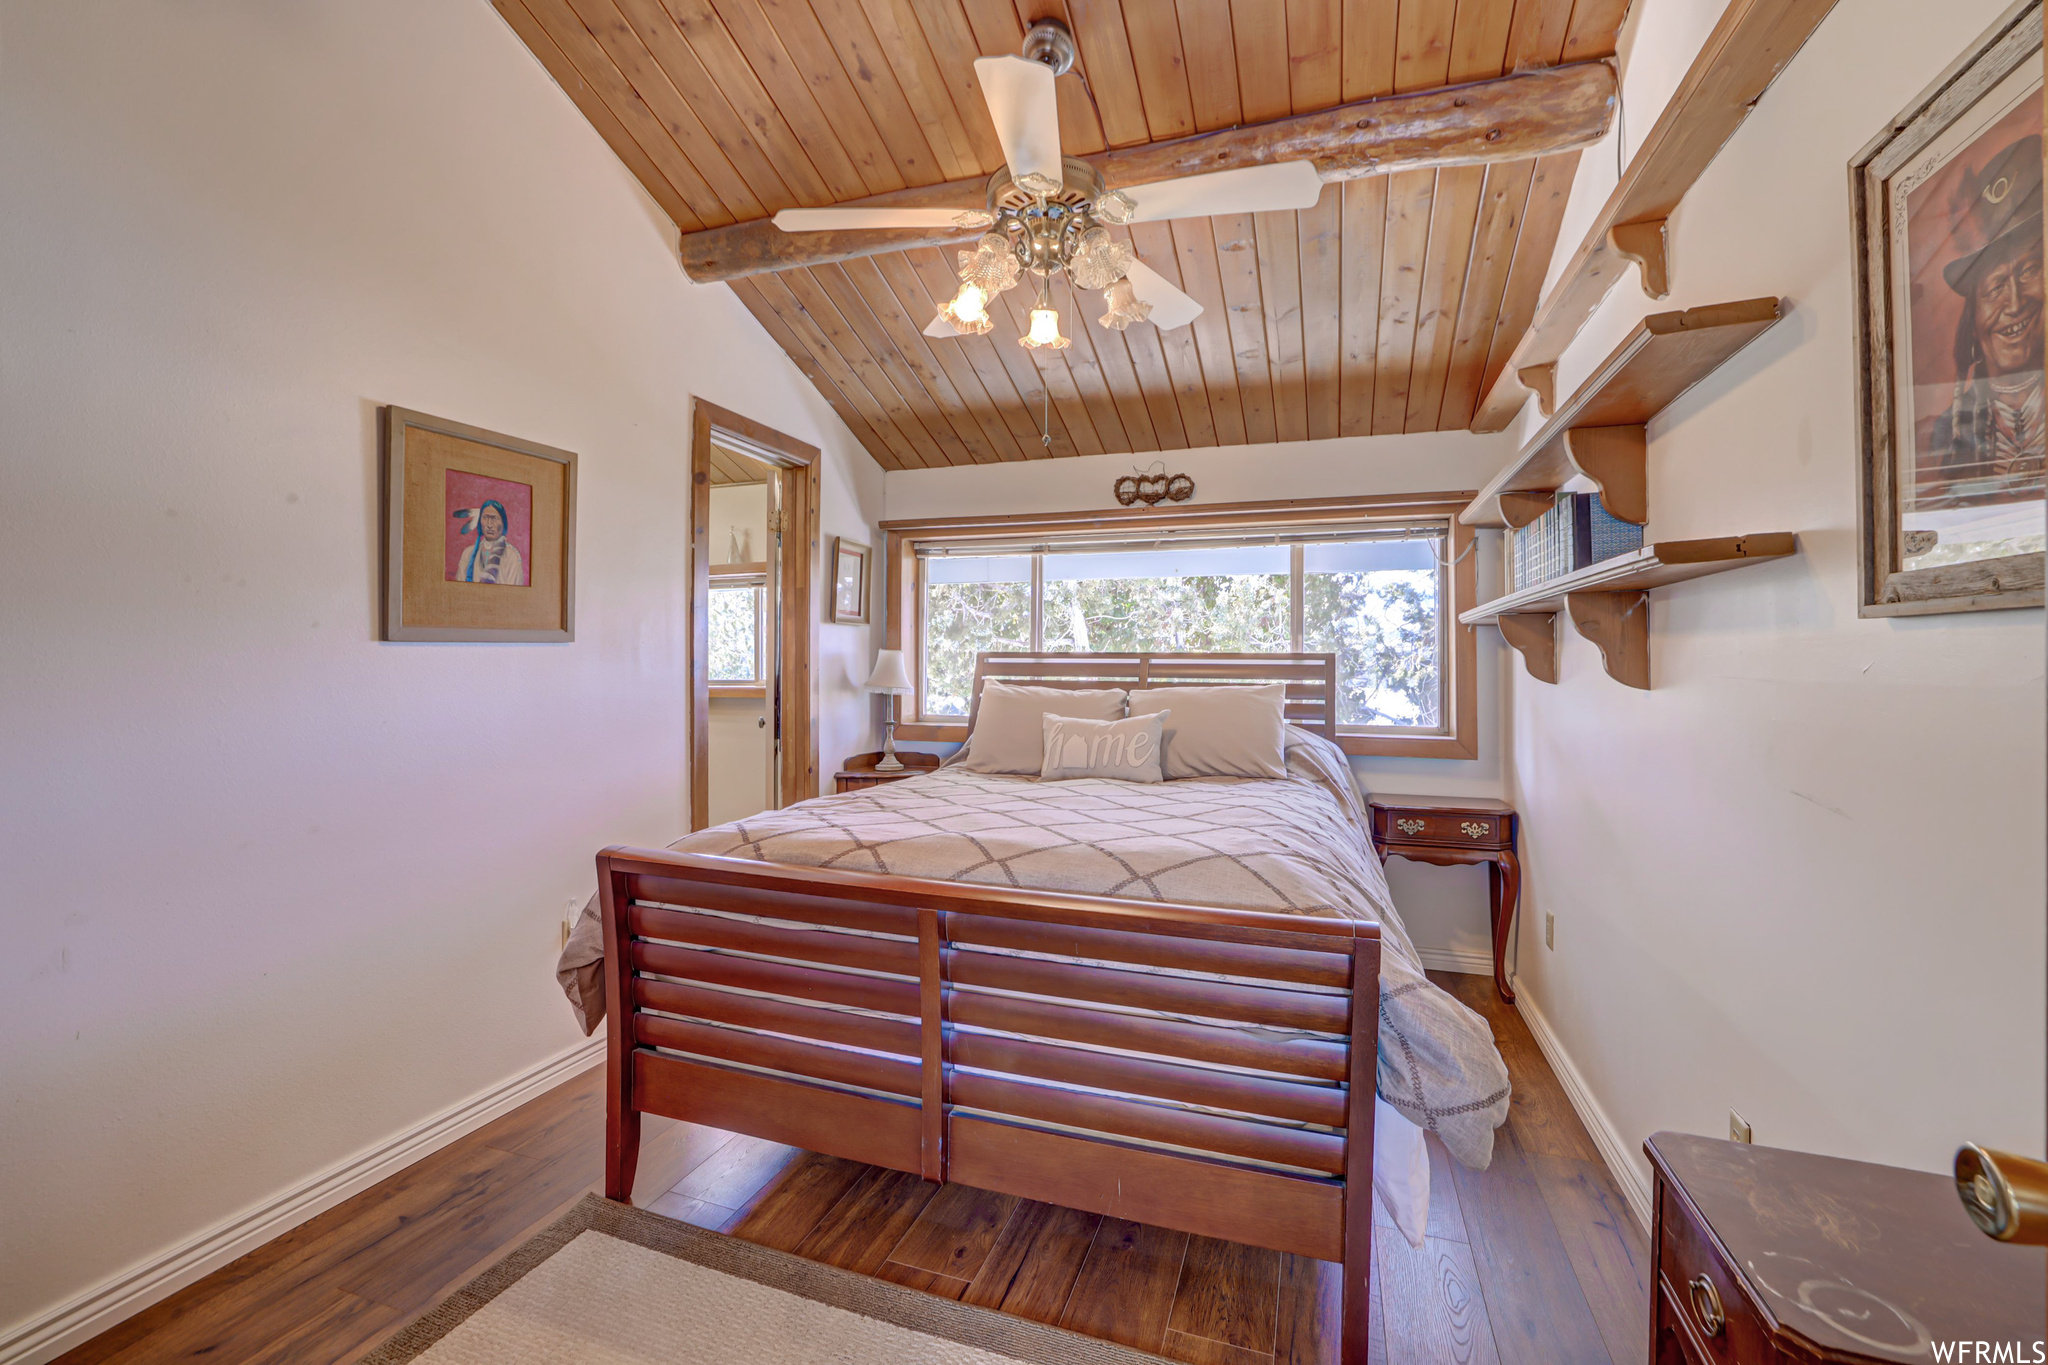 Bedroom with dark wood-type flooring, wood ceiling, ceiling fan, and lofted ceiling with beams